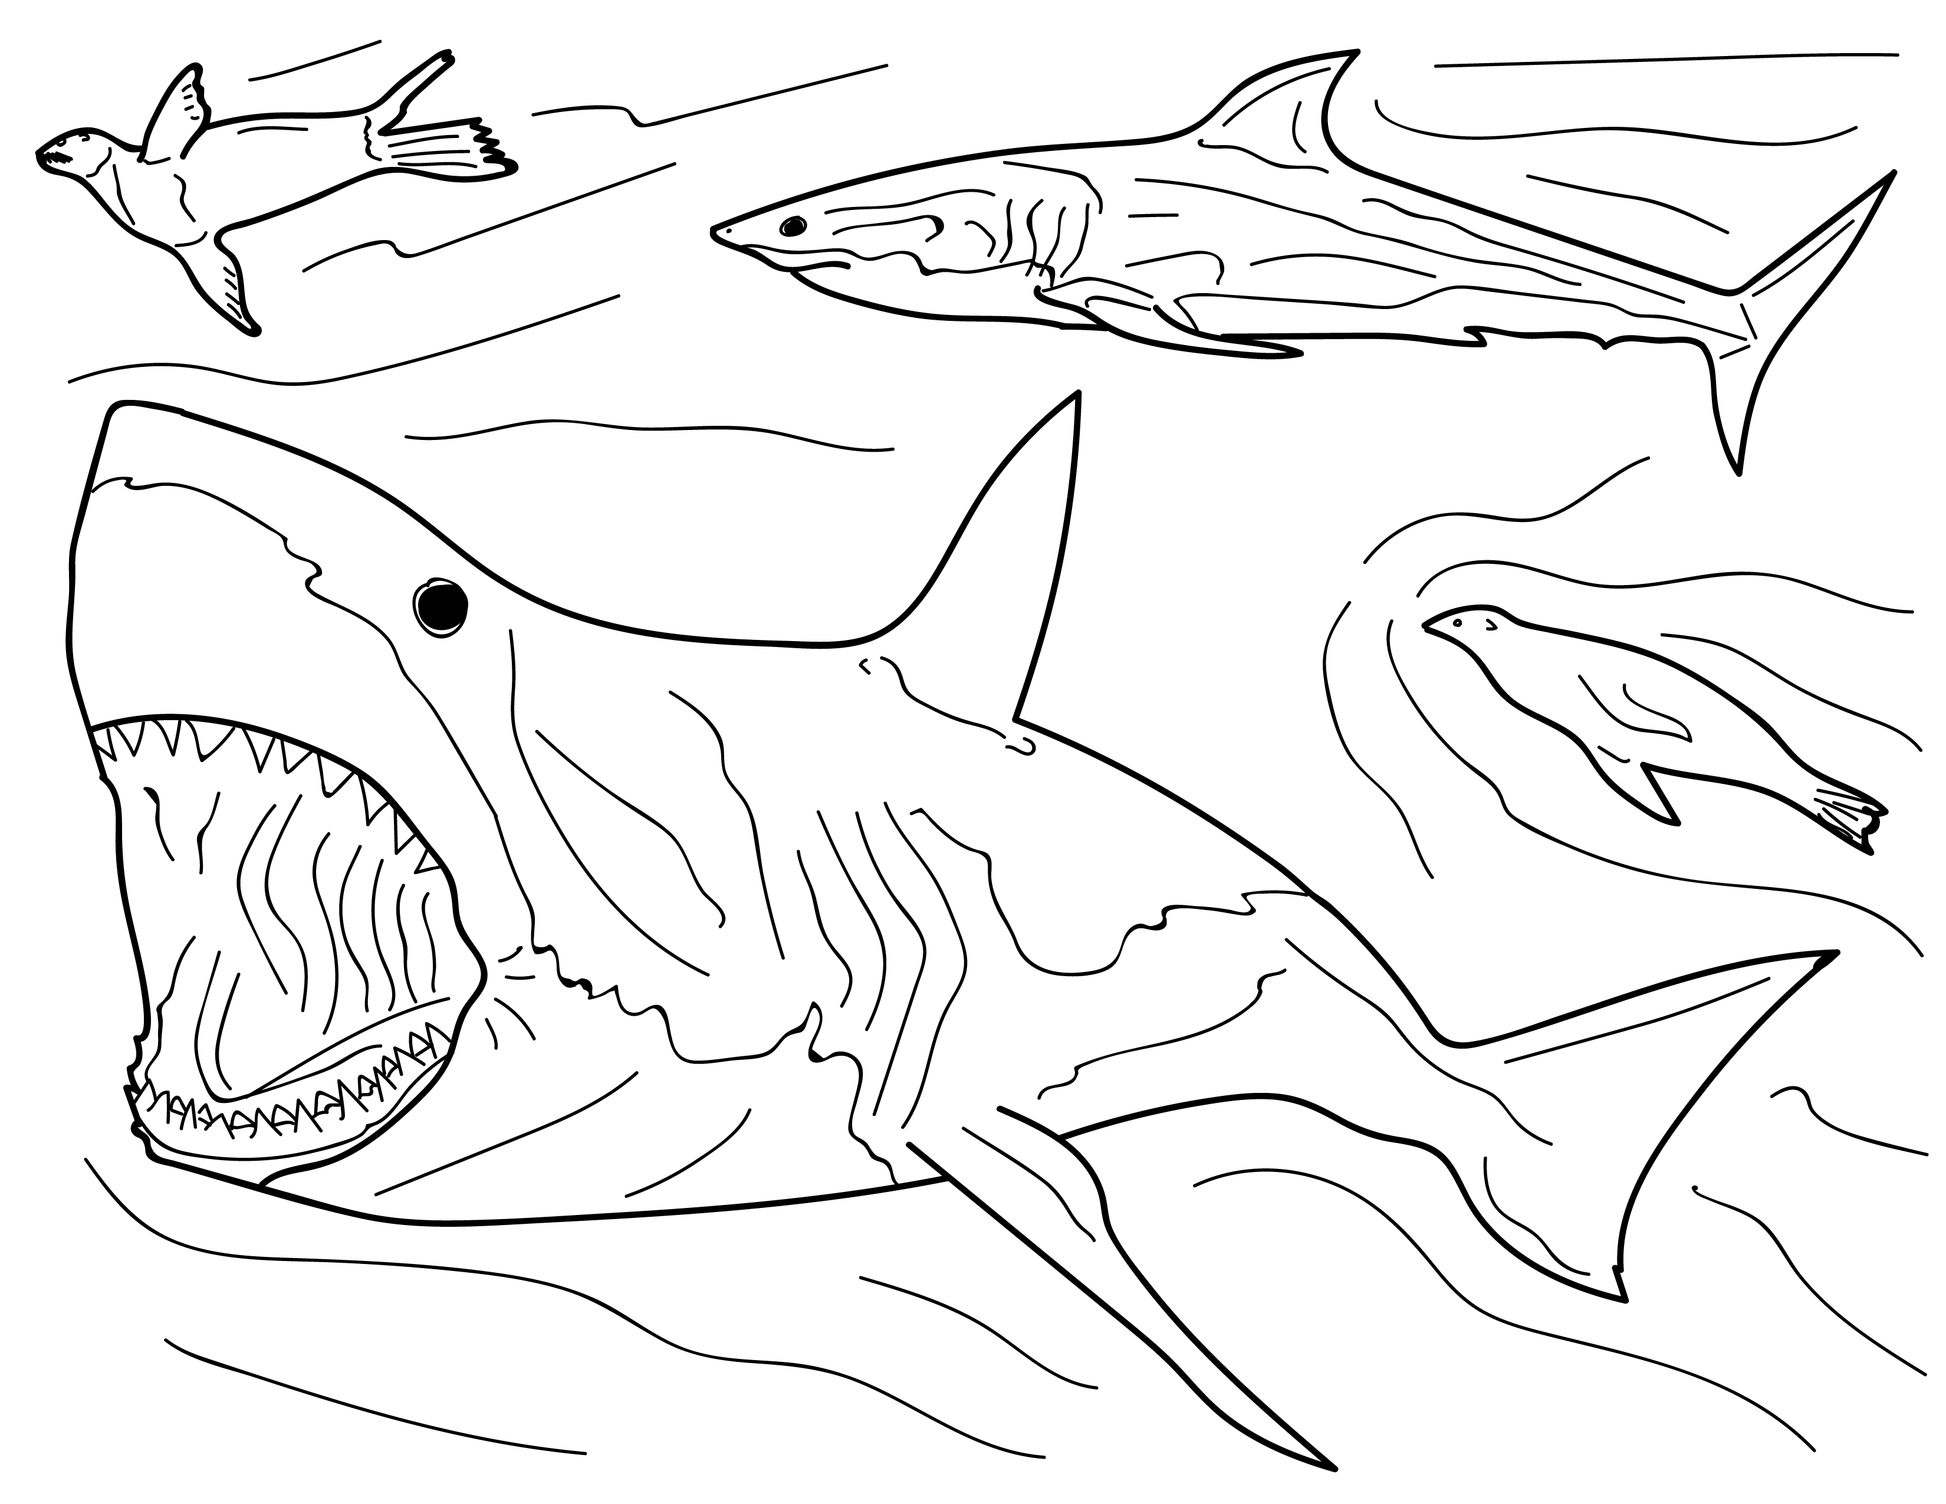 Coloring Books For Boys: Sharks: Advanced Coloring Pages for Tweens, Older Kids & Boys, Geometric Designs & Patterns, Underwater Ocean Theme, Surfing Sharks, Pirate Sharks, Sports Sharks, Scary Sharks & More, Art Therapy & Meditation Practice for Stress R [Book]